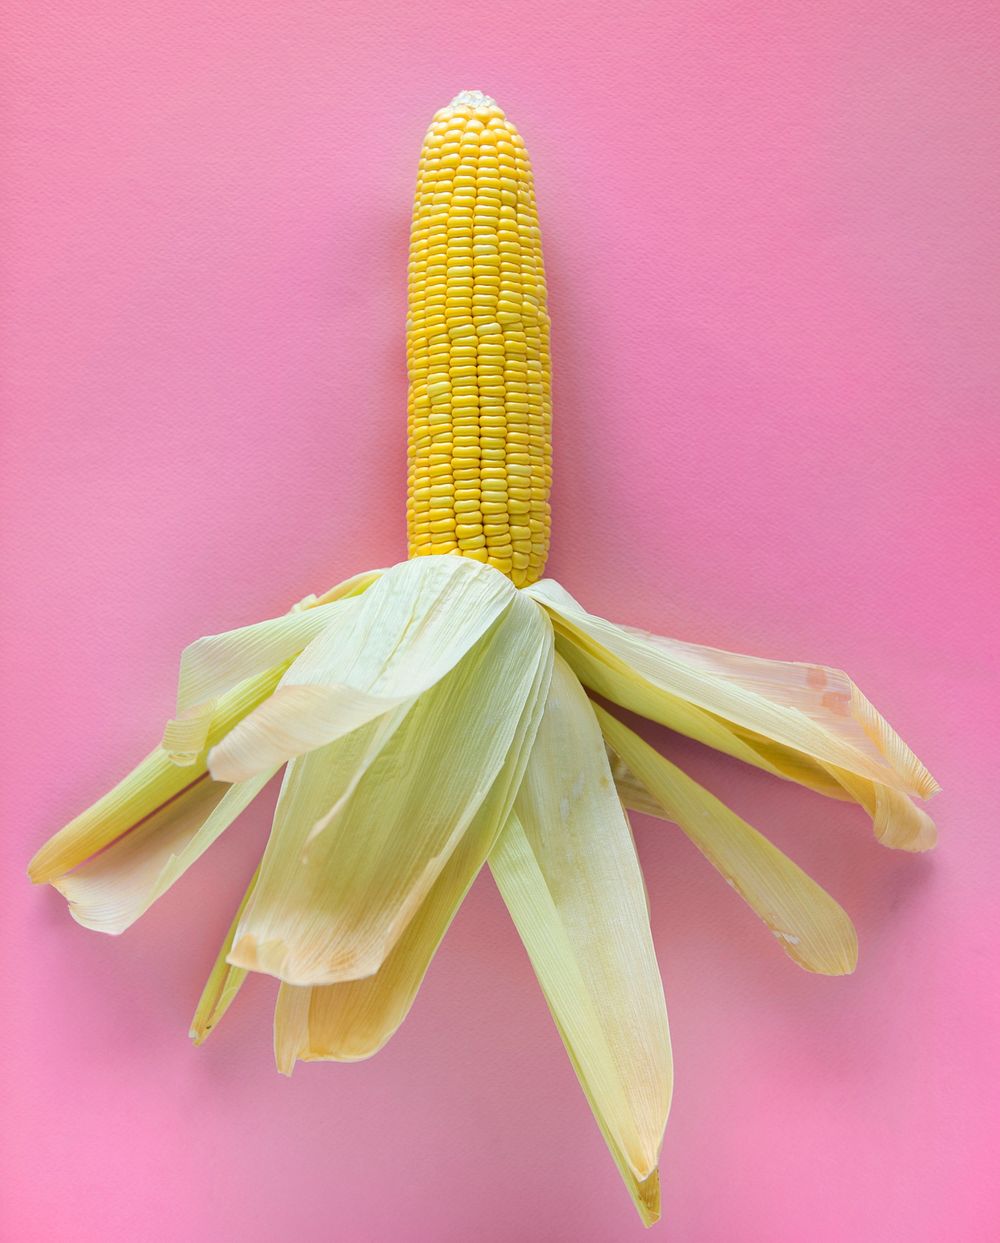 Yellow raw corn in a pink background